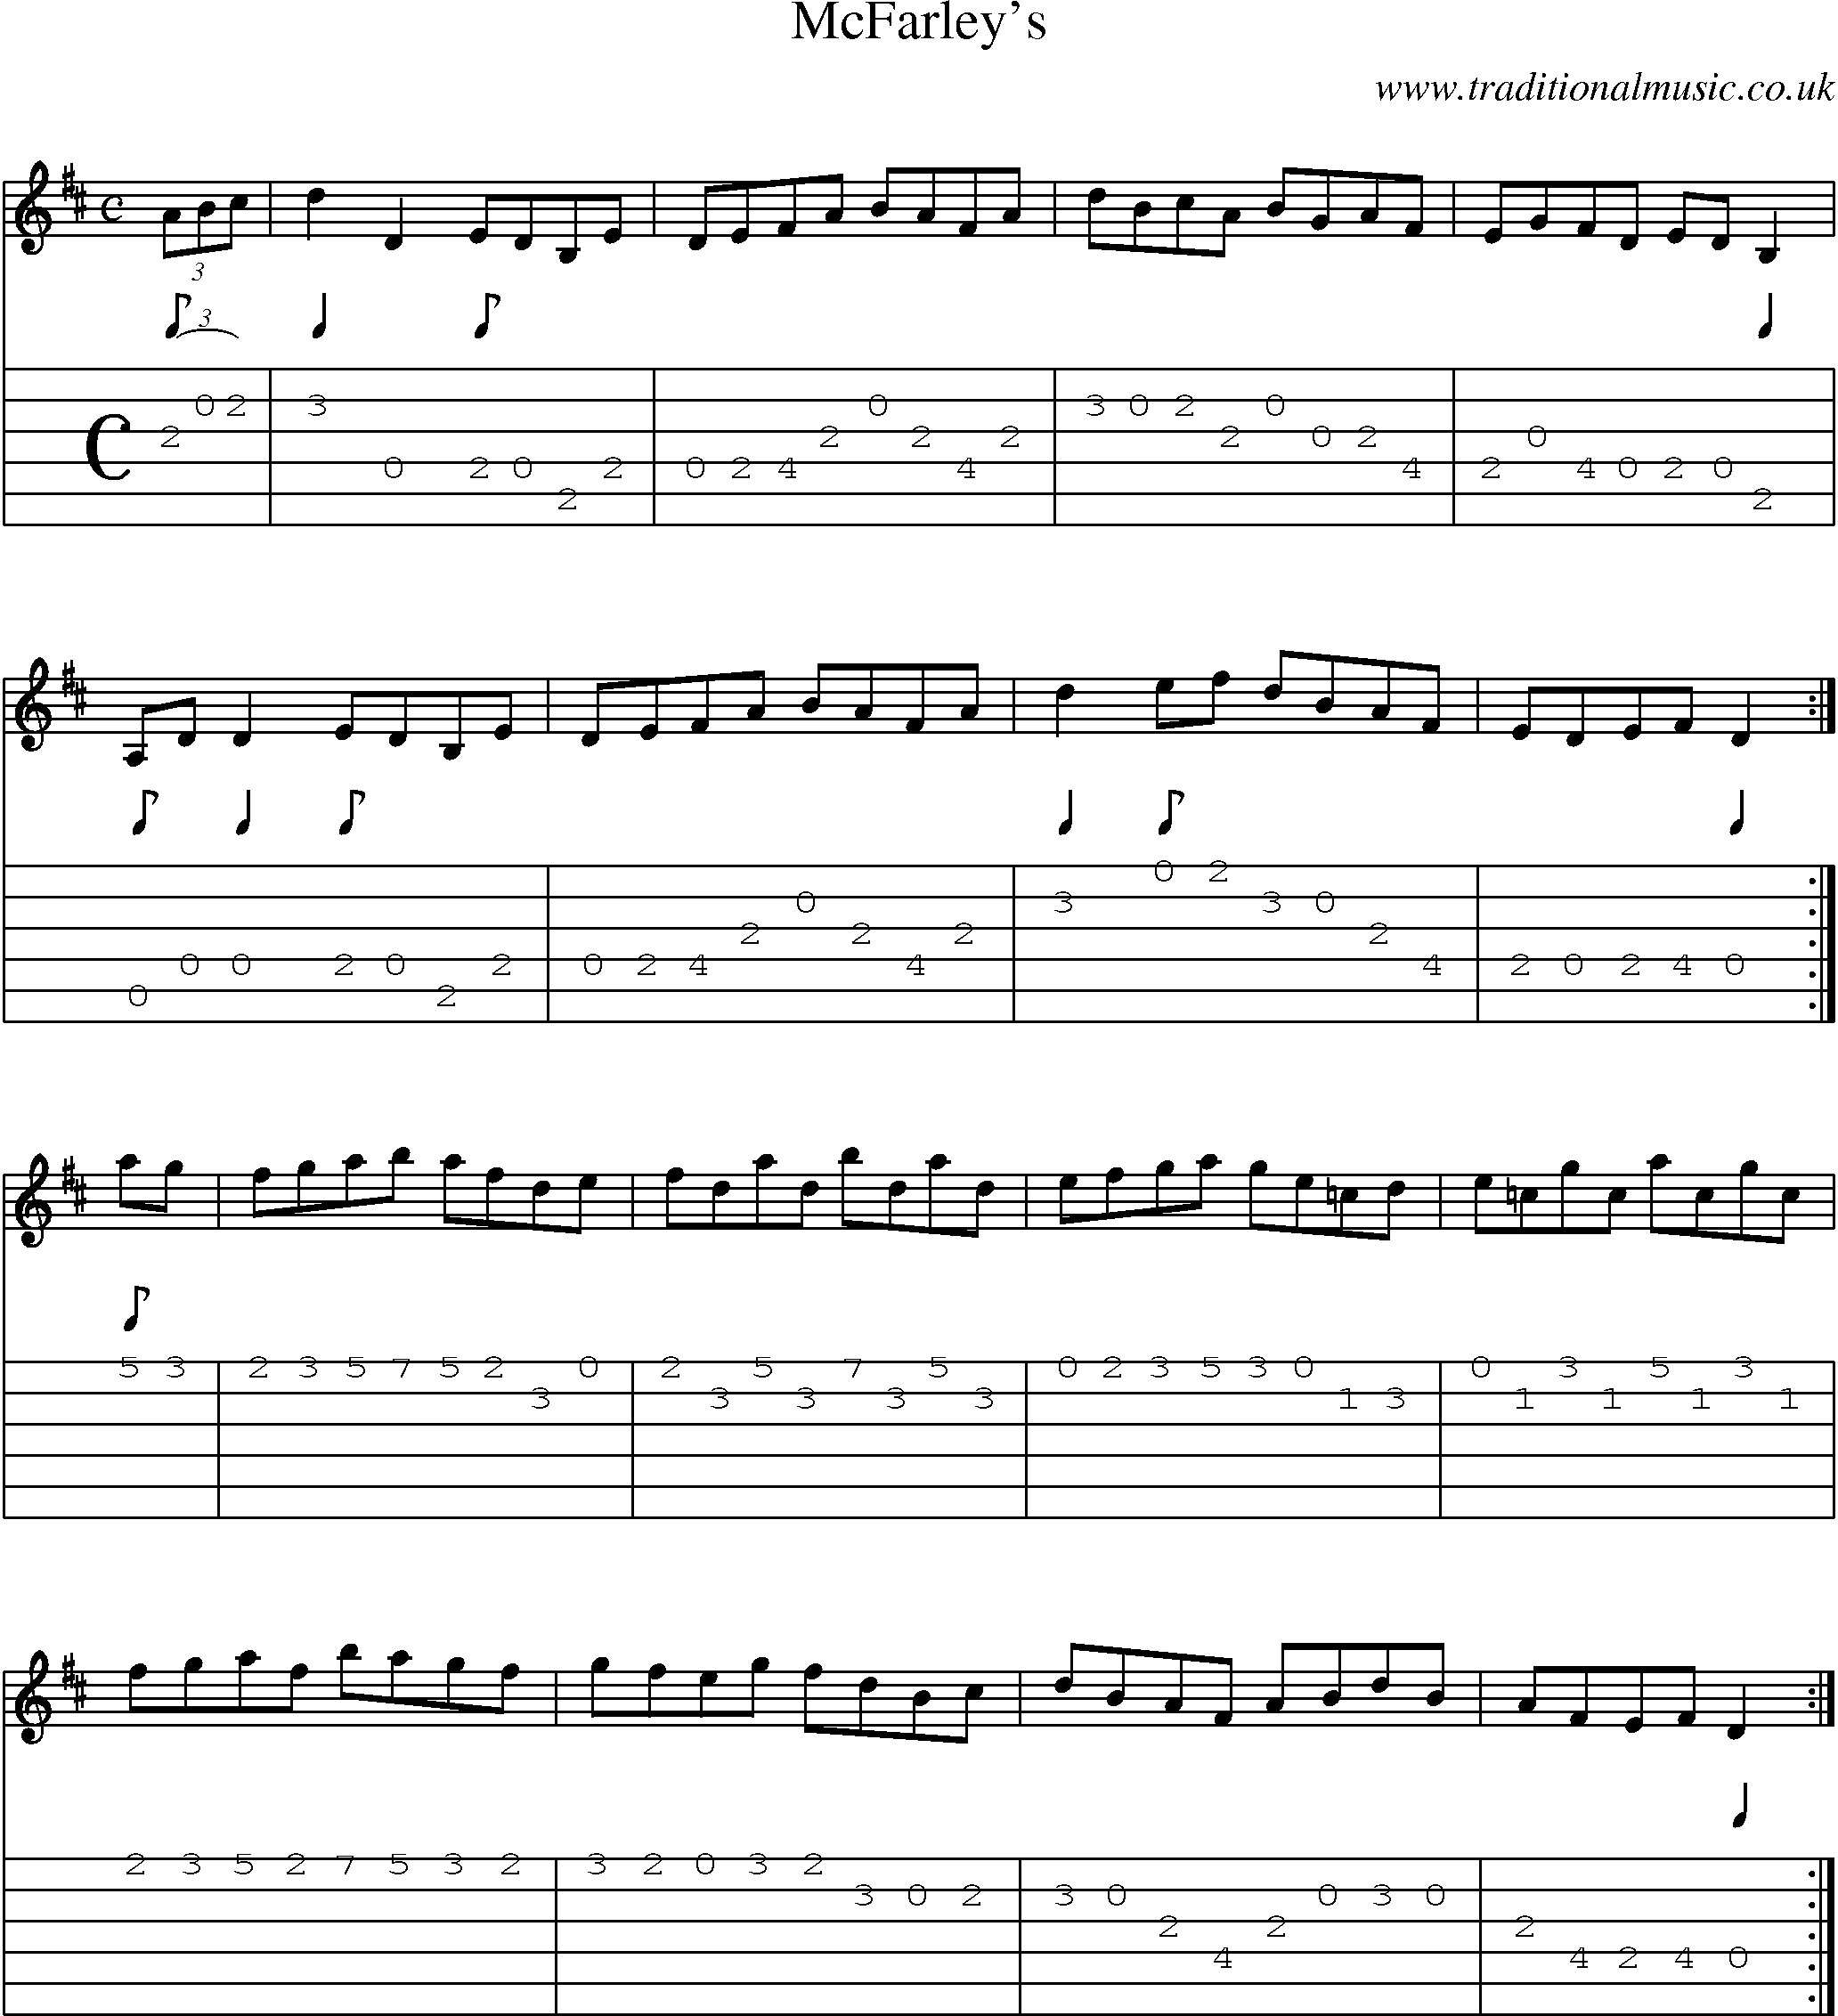 Music Score and Guitar Tabs for Mcfarleys